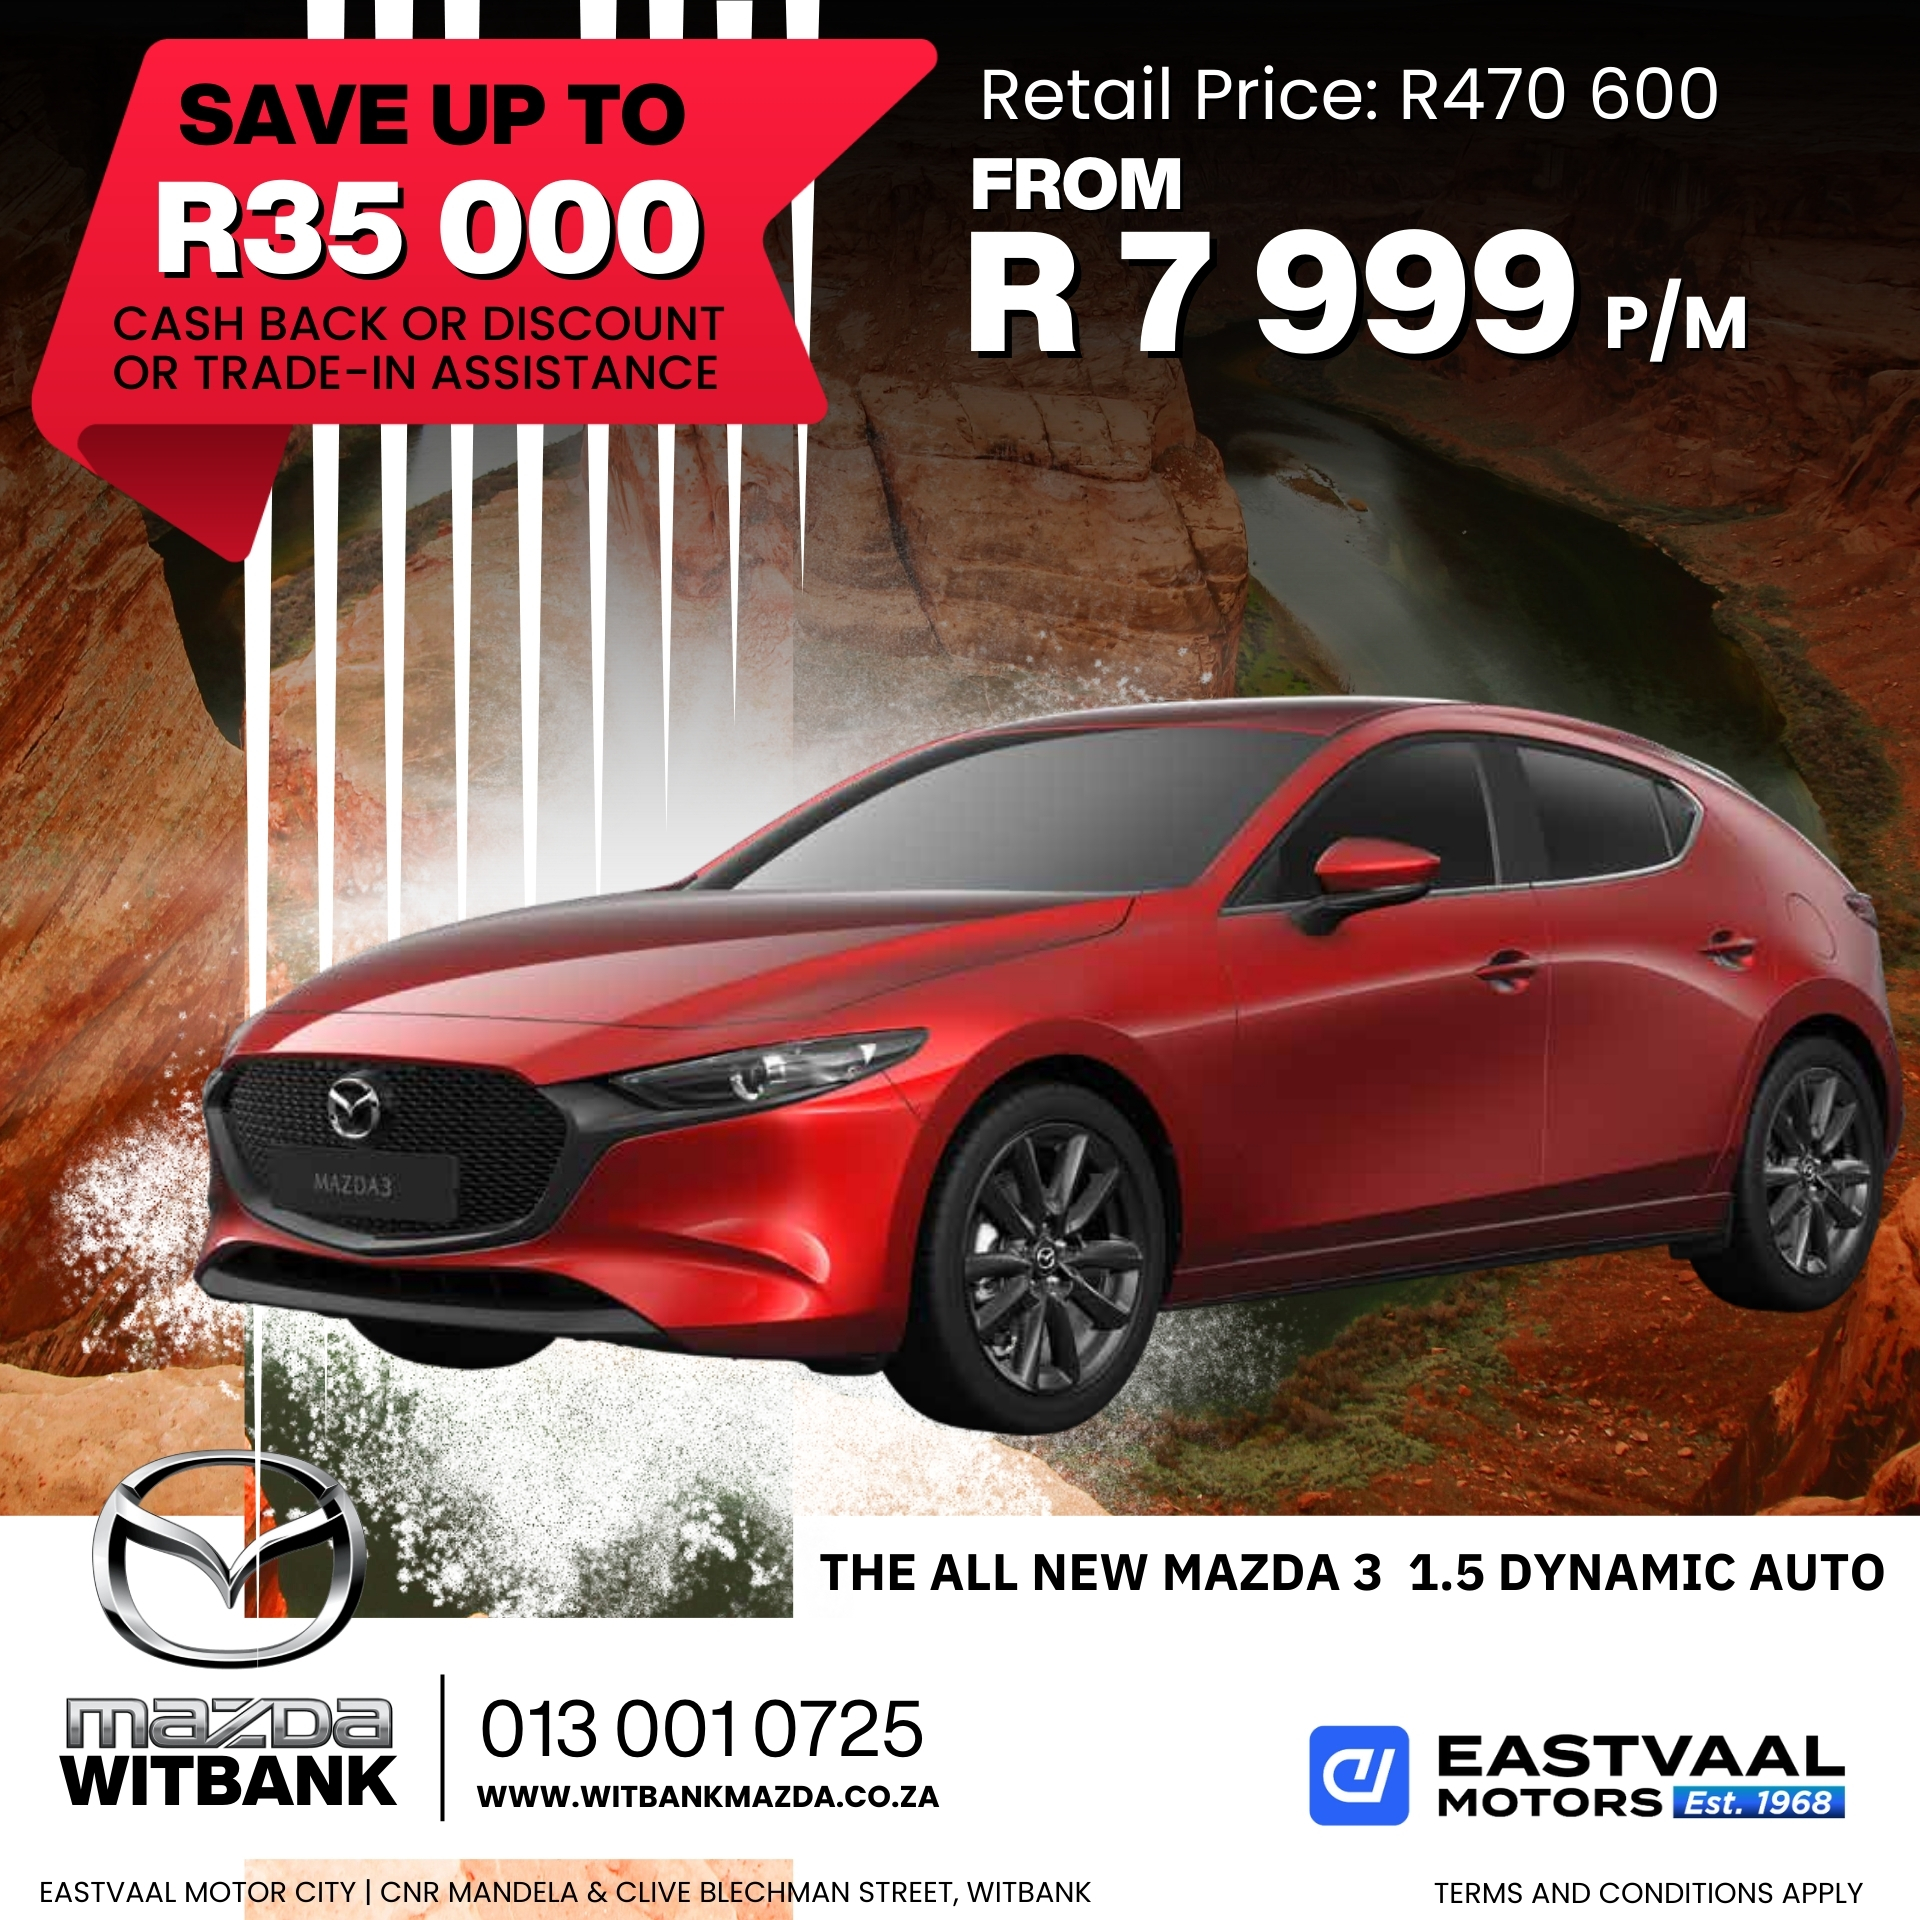 Unleash your adventure this July with Mazda! Special offers on all models at Eastvaal Motor City image from 